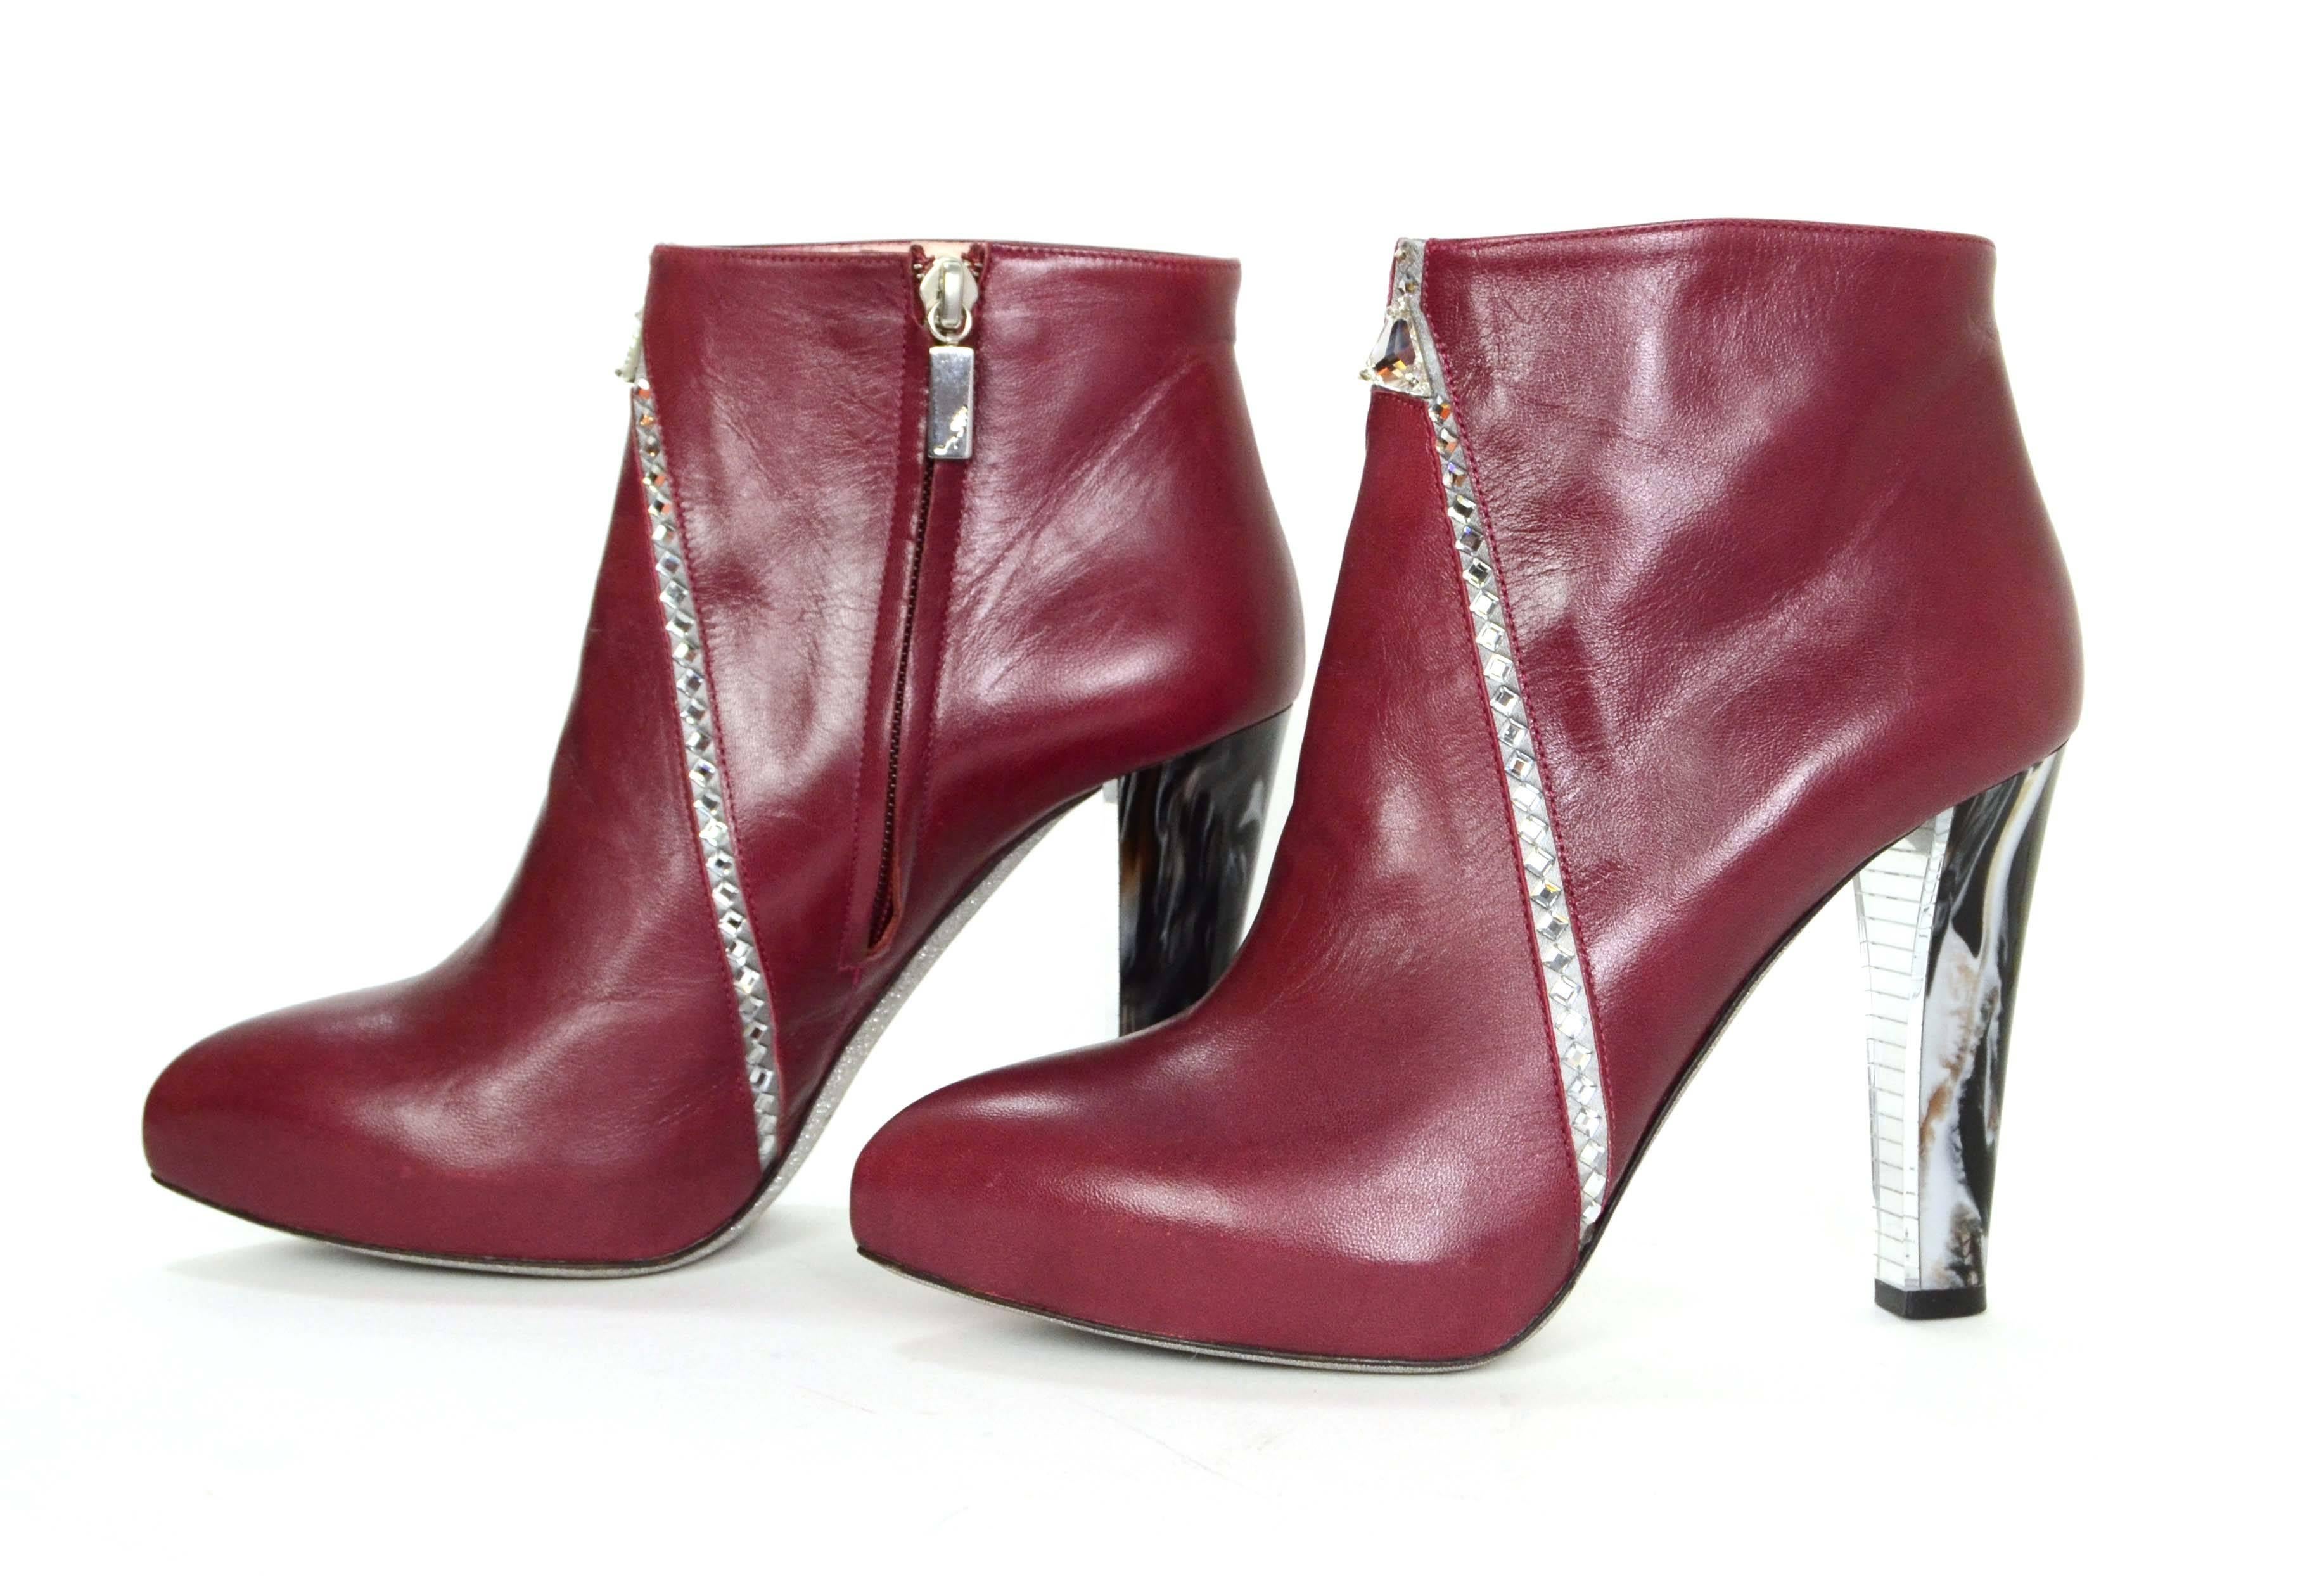 Rene Caovilla Crystal Embellished Burgundy Leather Booties 
Features marble heel and glitter soles
Made In: Italy
Color: Burgundy black and silver
Composition: Leather, resin, and crystal
Closure/Opening: Inside ankle zipper
Sole Stamp: Rene